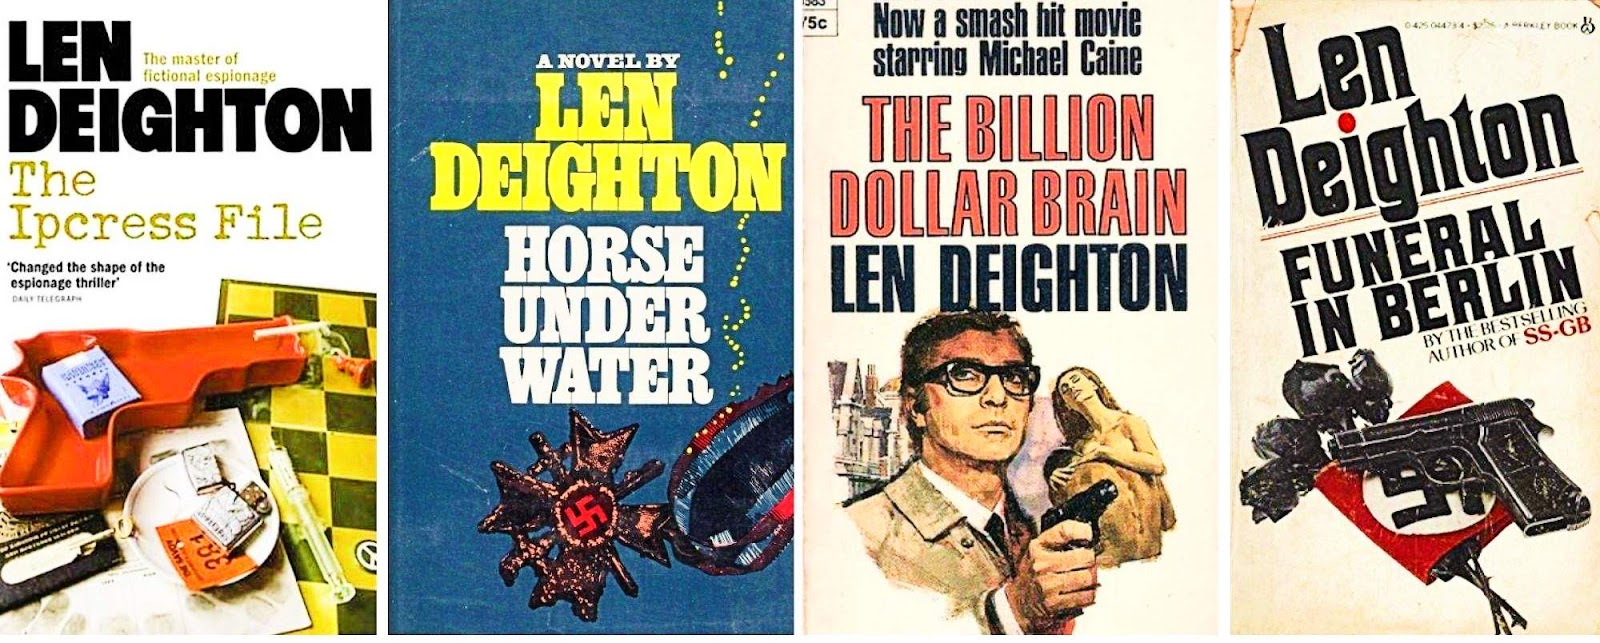 Len Deighton wrote The Ipcress File and Funeral in Berlin